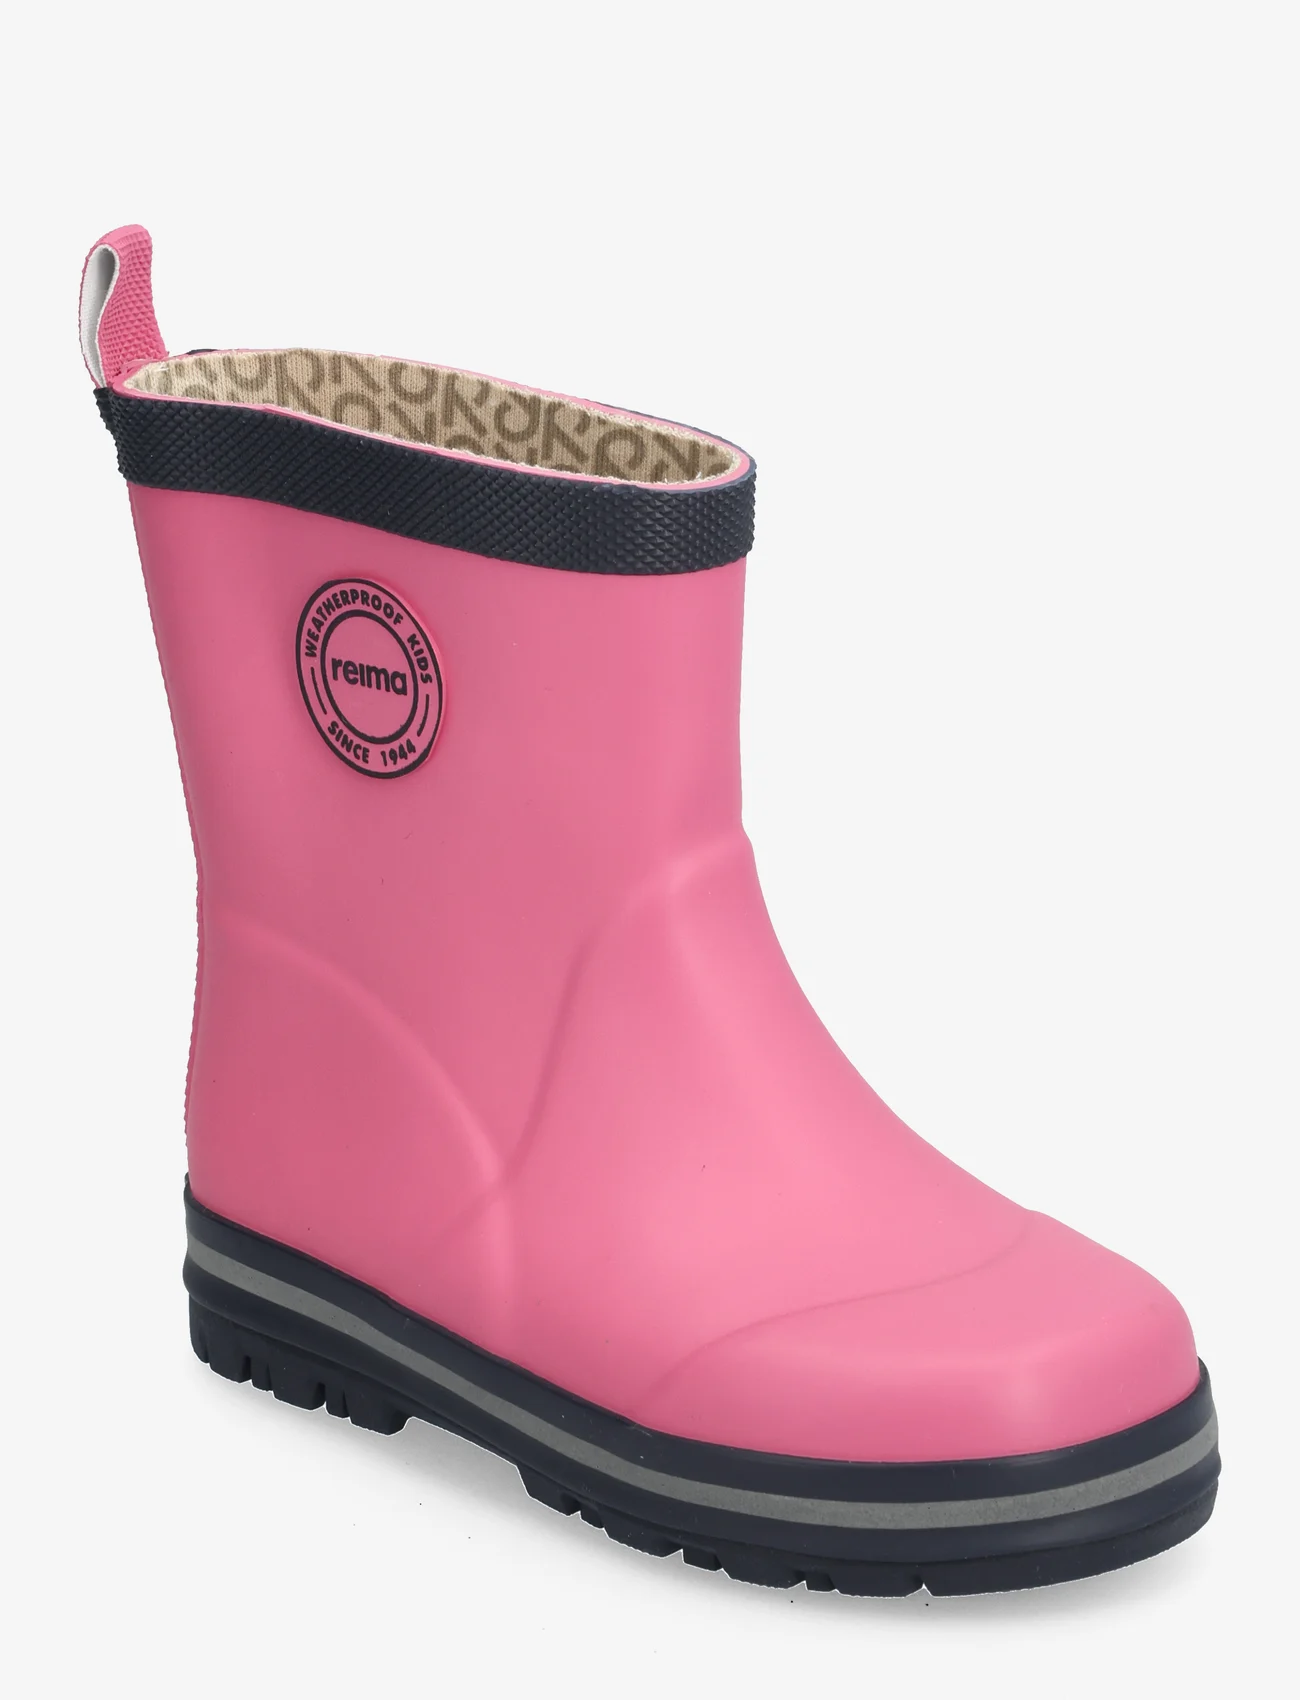 Reima - Rain boots, Taika 2.0 - unlined rubberboots - candy pink - 0